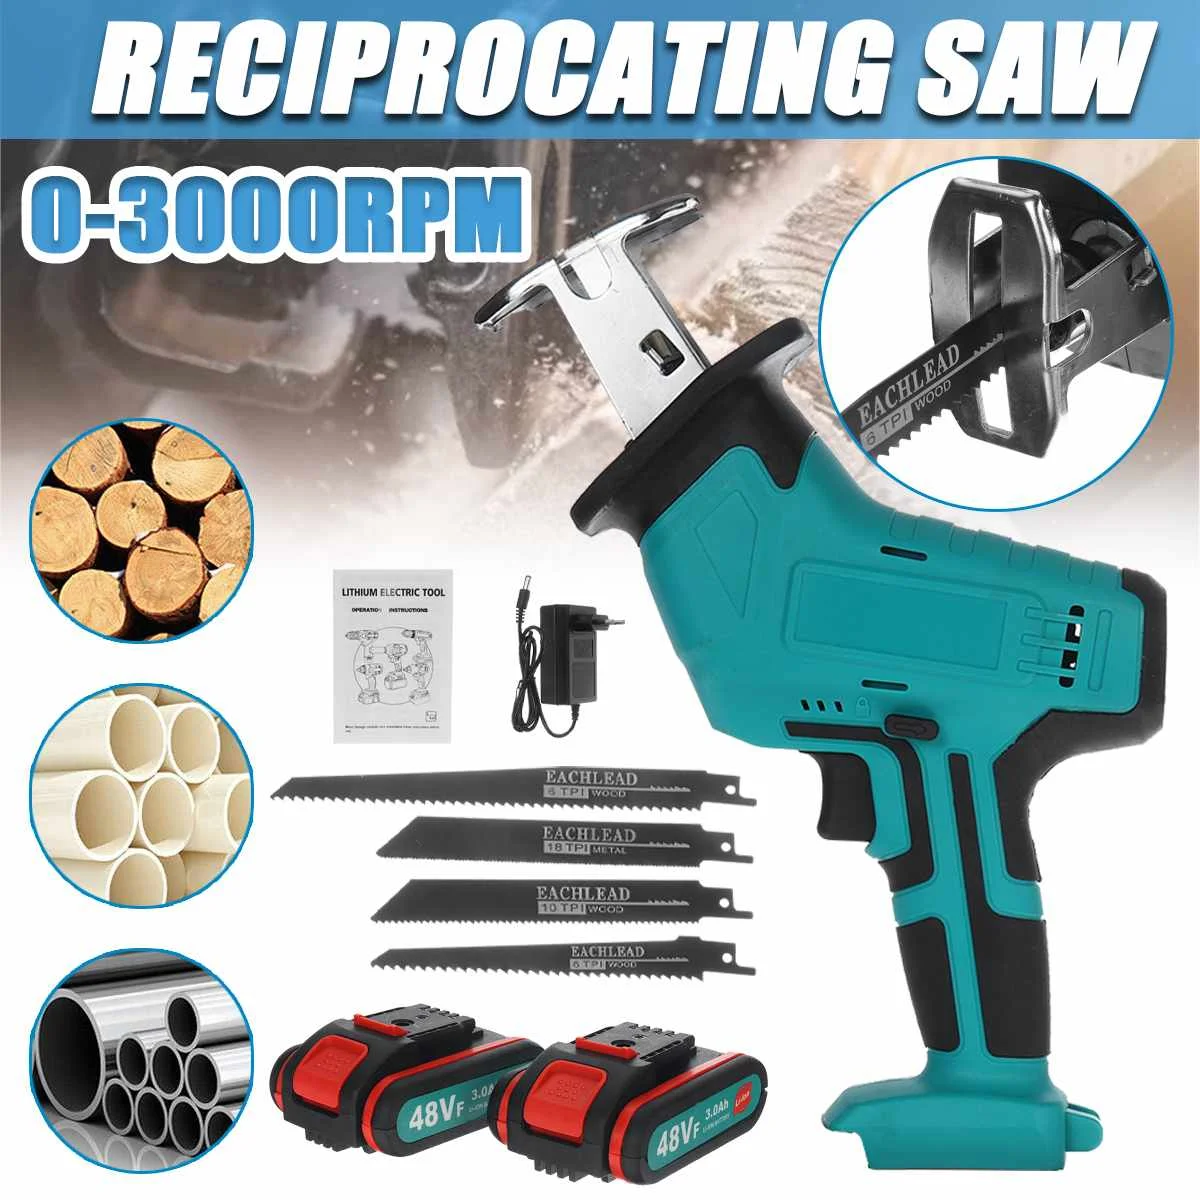 

48VF Electric Cordless Reciprocating Saw Mini Saw Chainsaw Running Saw Power Tools for Wood Metal Cutting With 2Battery 4 Blades